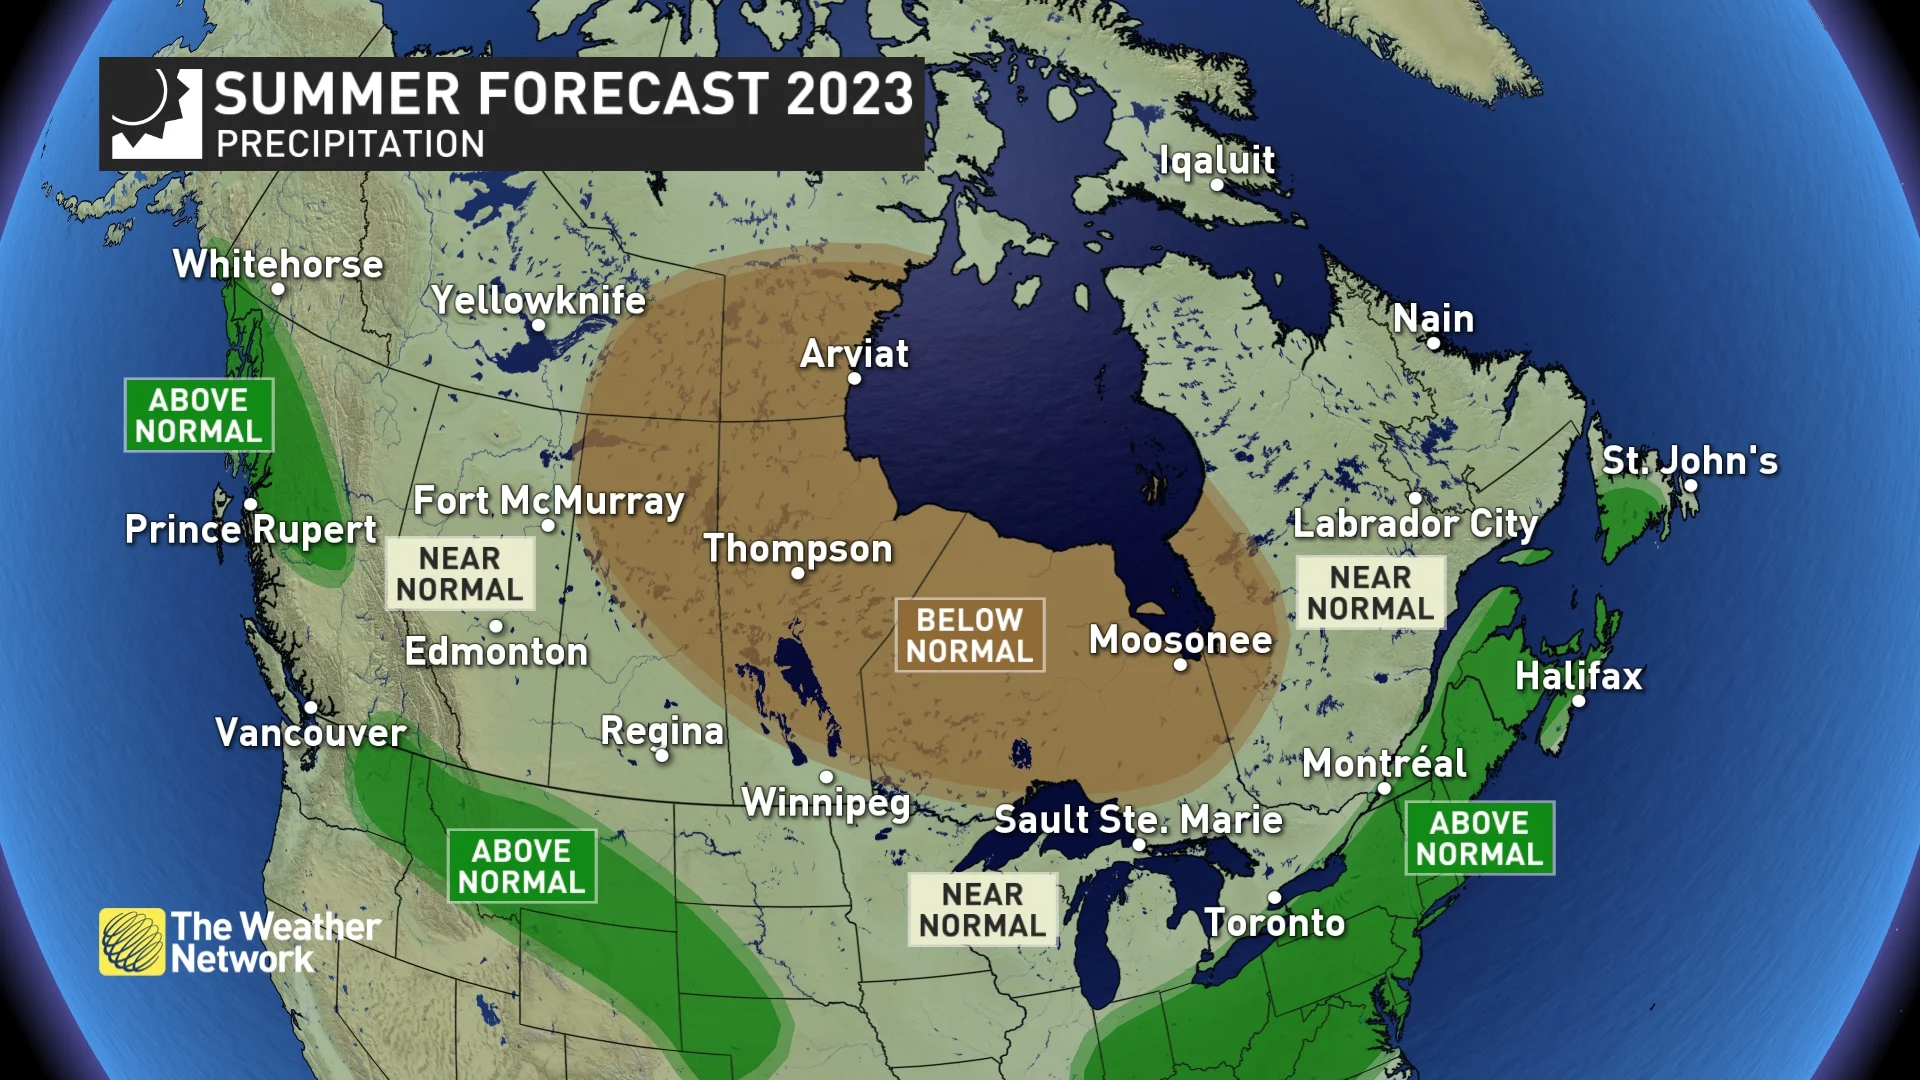 The Weather Network's 2023 Summer Forecast: Canada's Precipitation Outlook